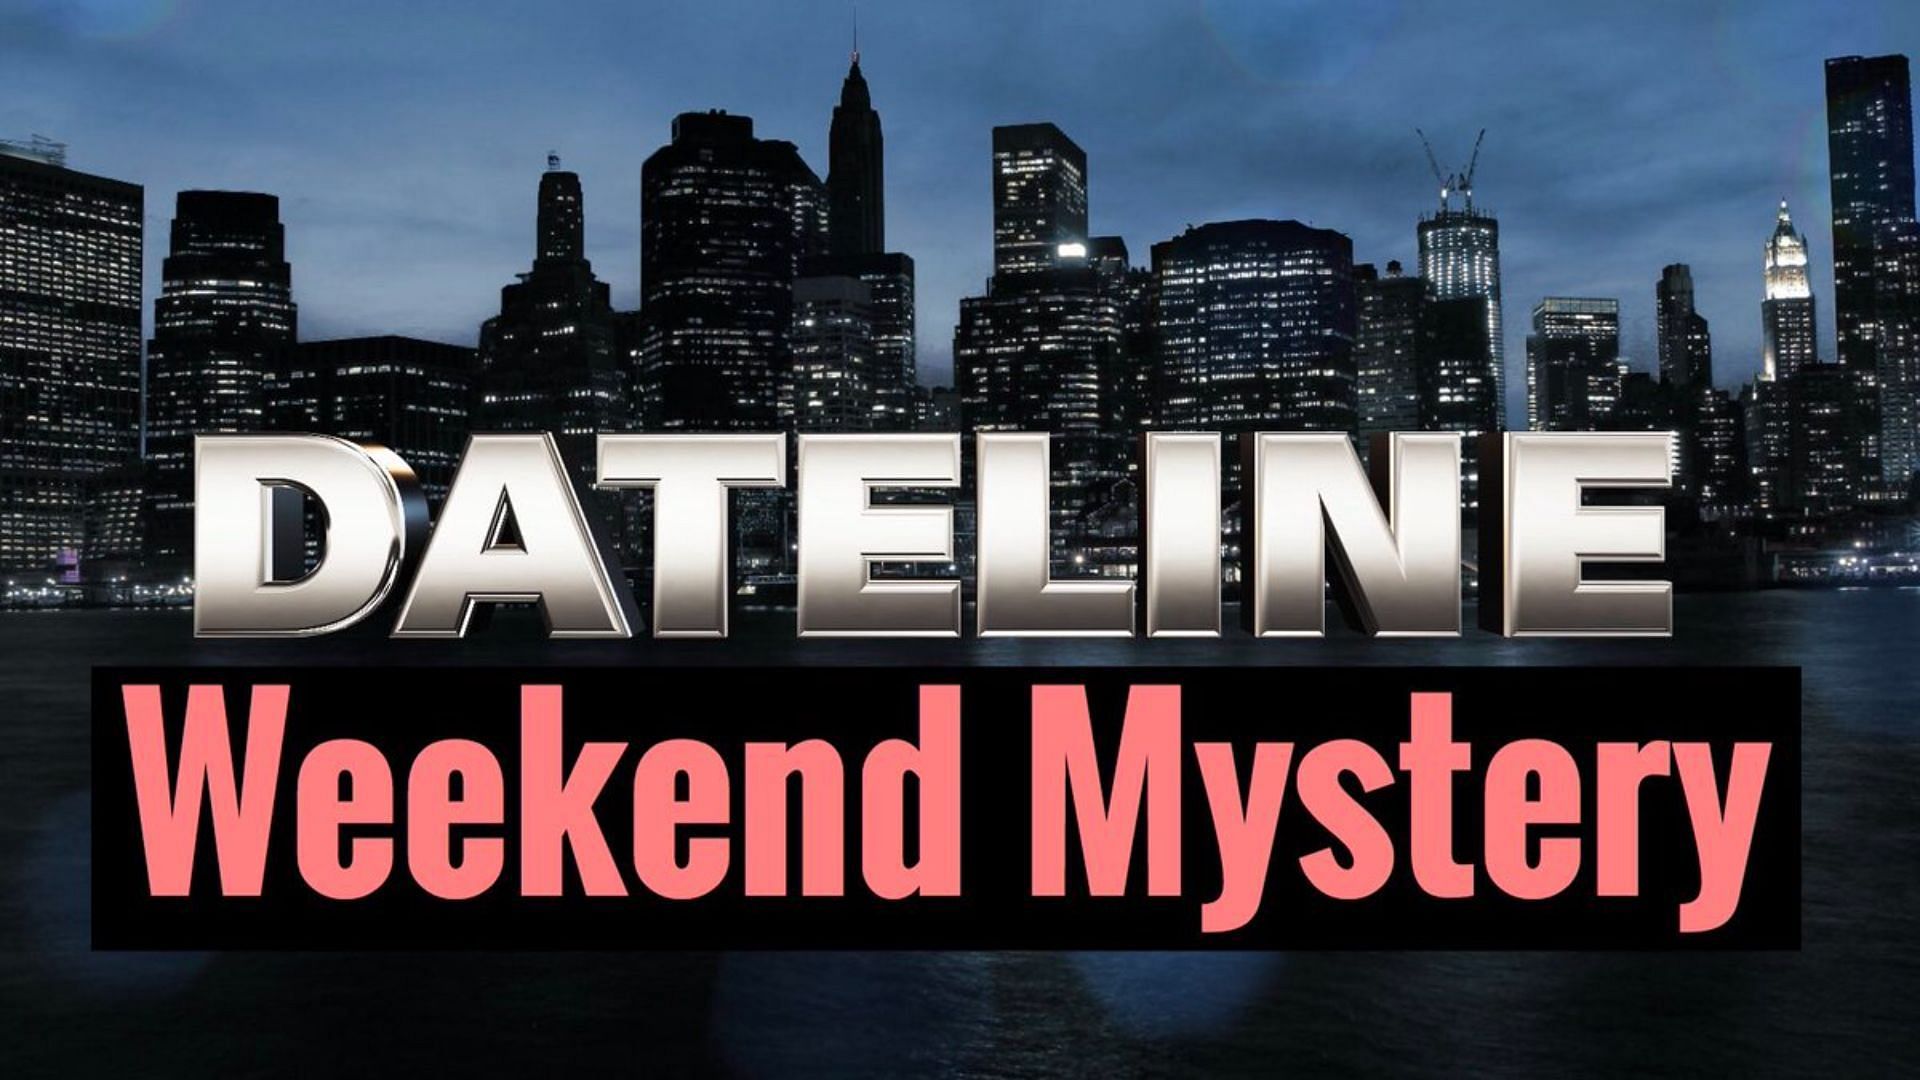 Dateline Weekend Mystery: Deadly Exchange will premiere on 7 may 7/8c on NBC(Image Via nbcnews.com)